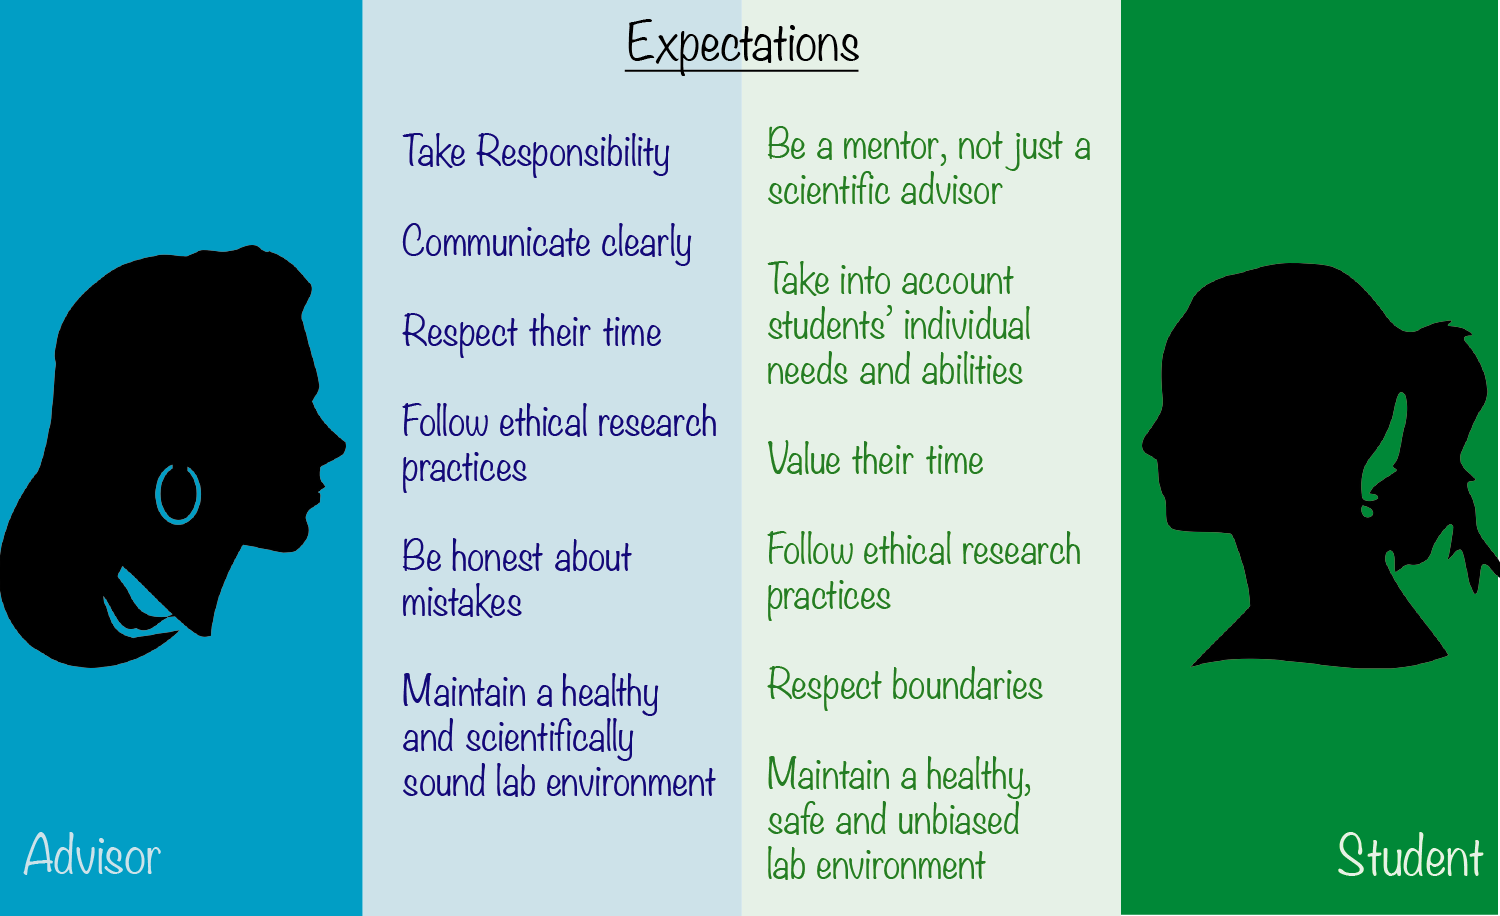 What&#x20;do&#x20;students&#x20;and&#x20;advisors&#x20;expect&#x20;from&#x20;each&#x20;other&#x3F;